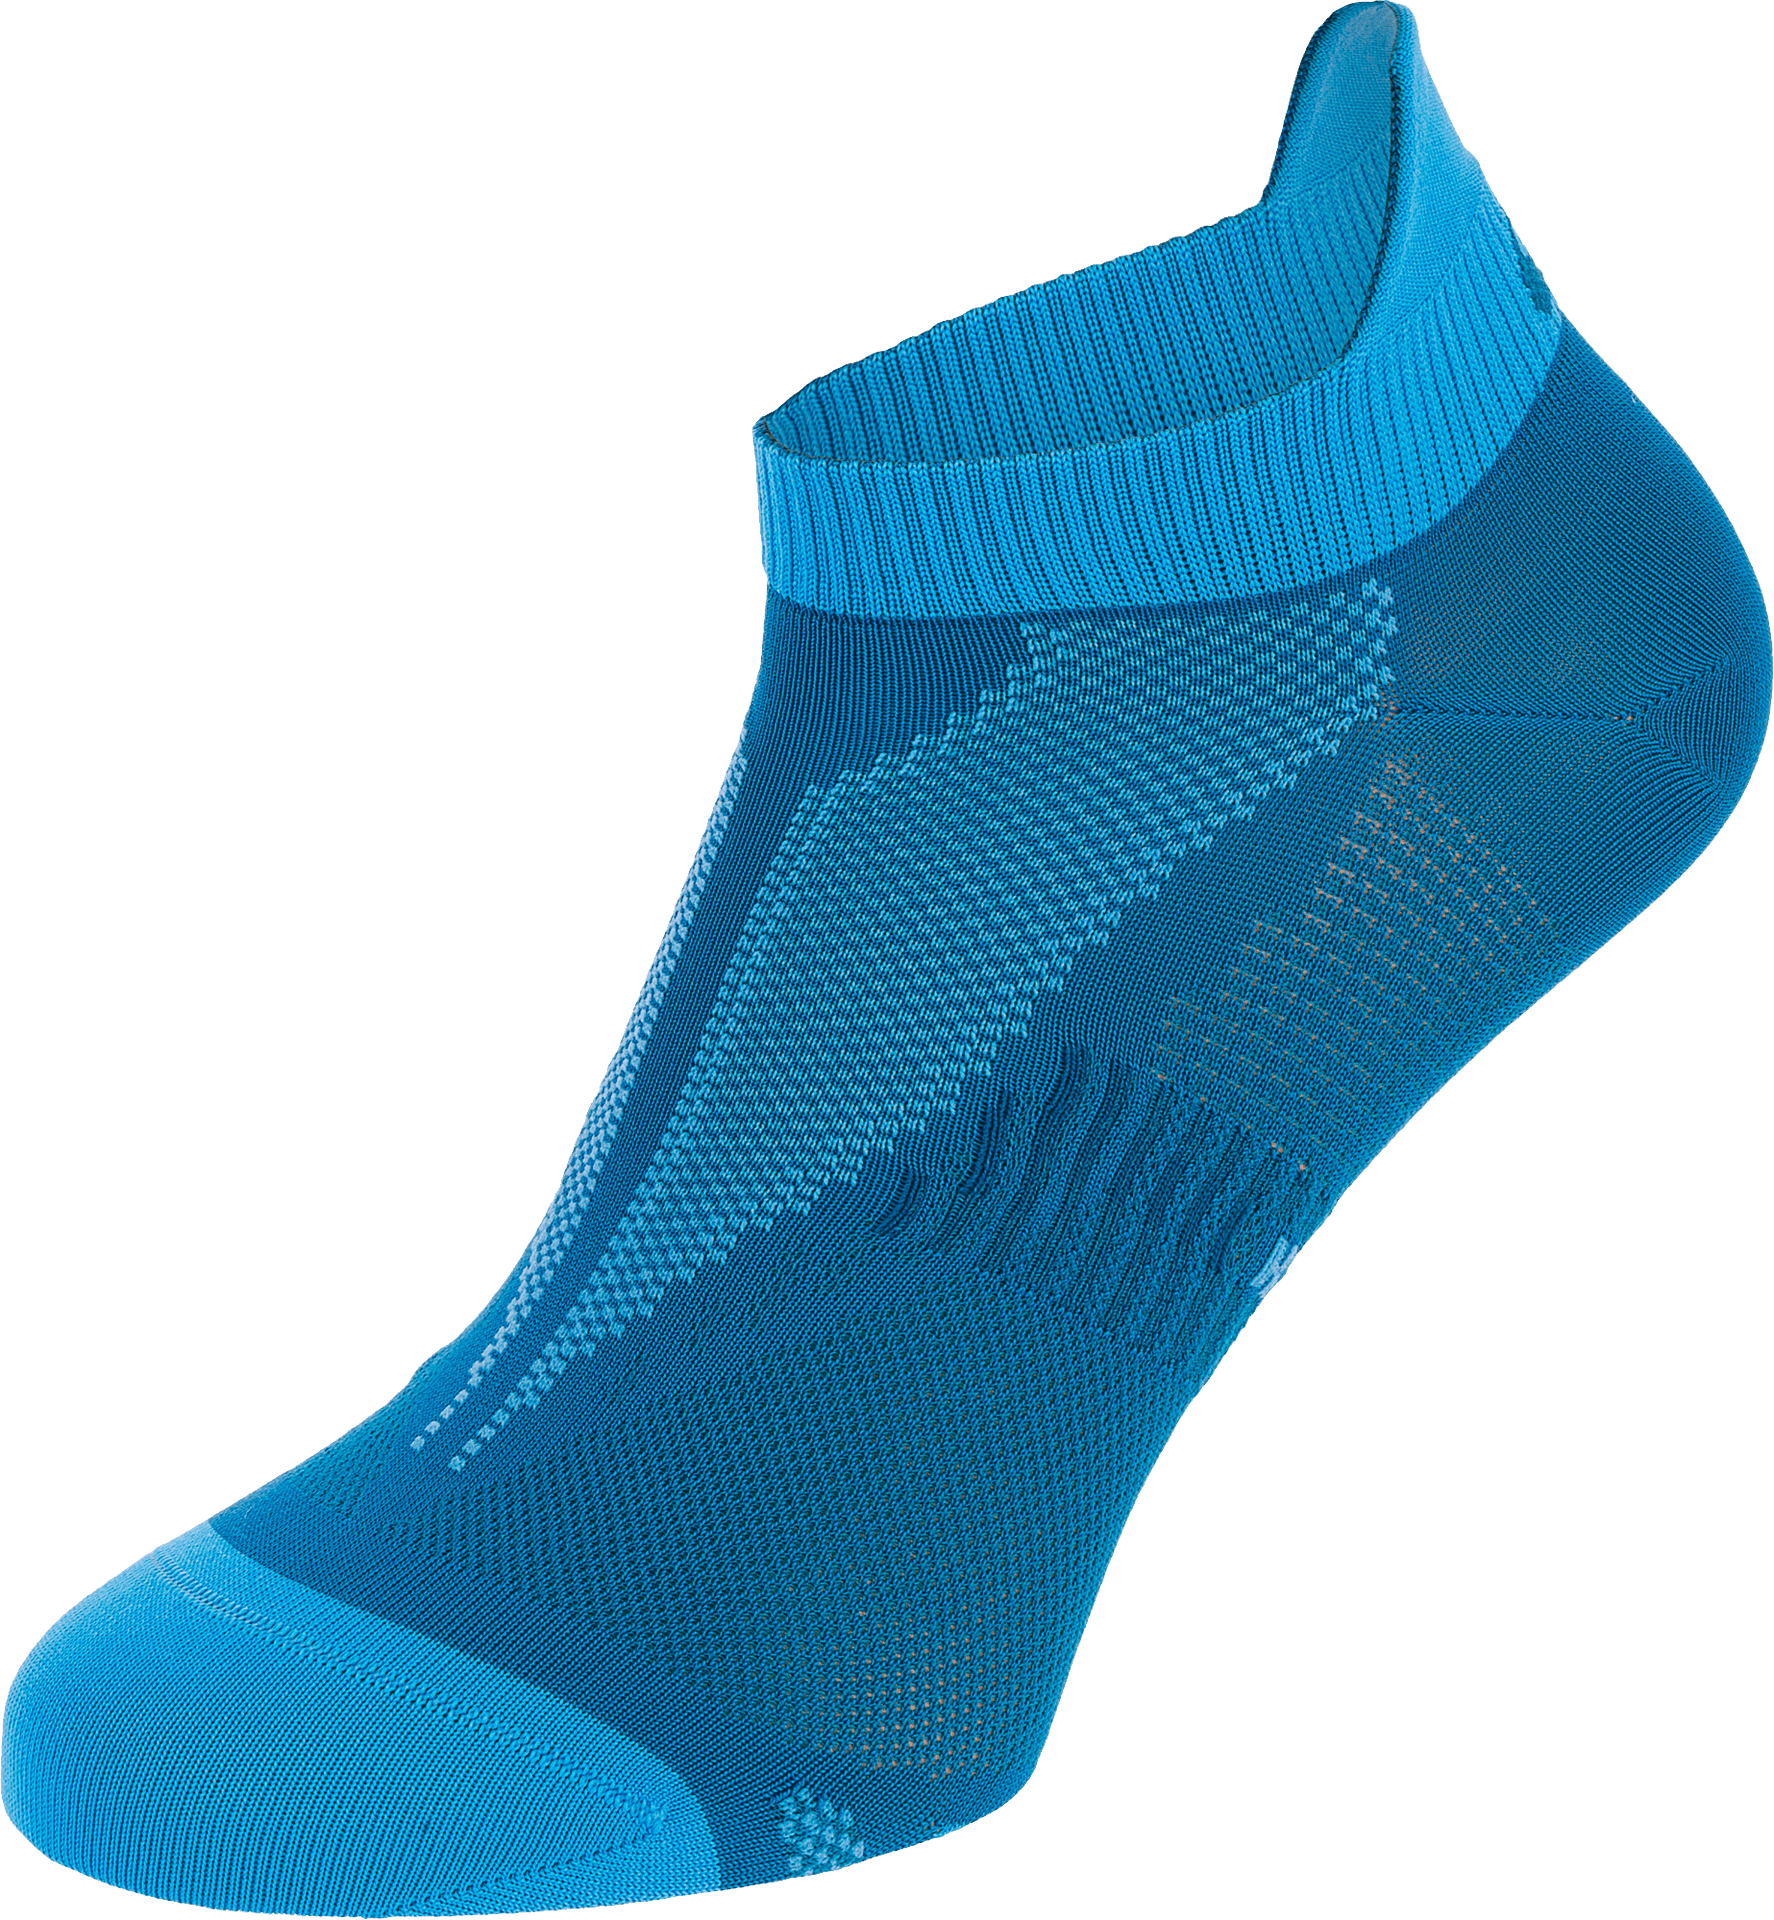 Blue Ankle Sock Isolated PNG